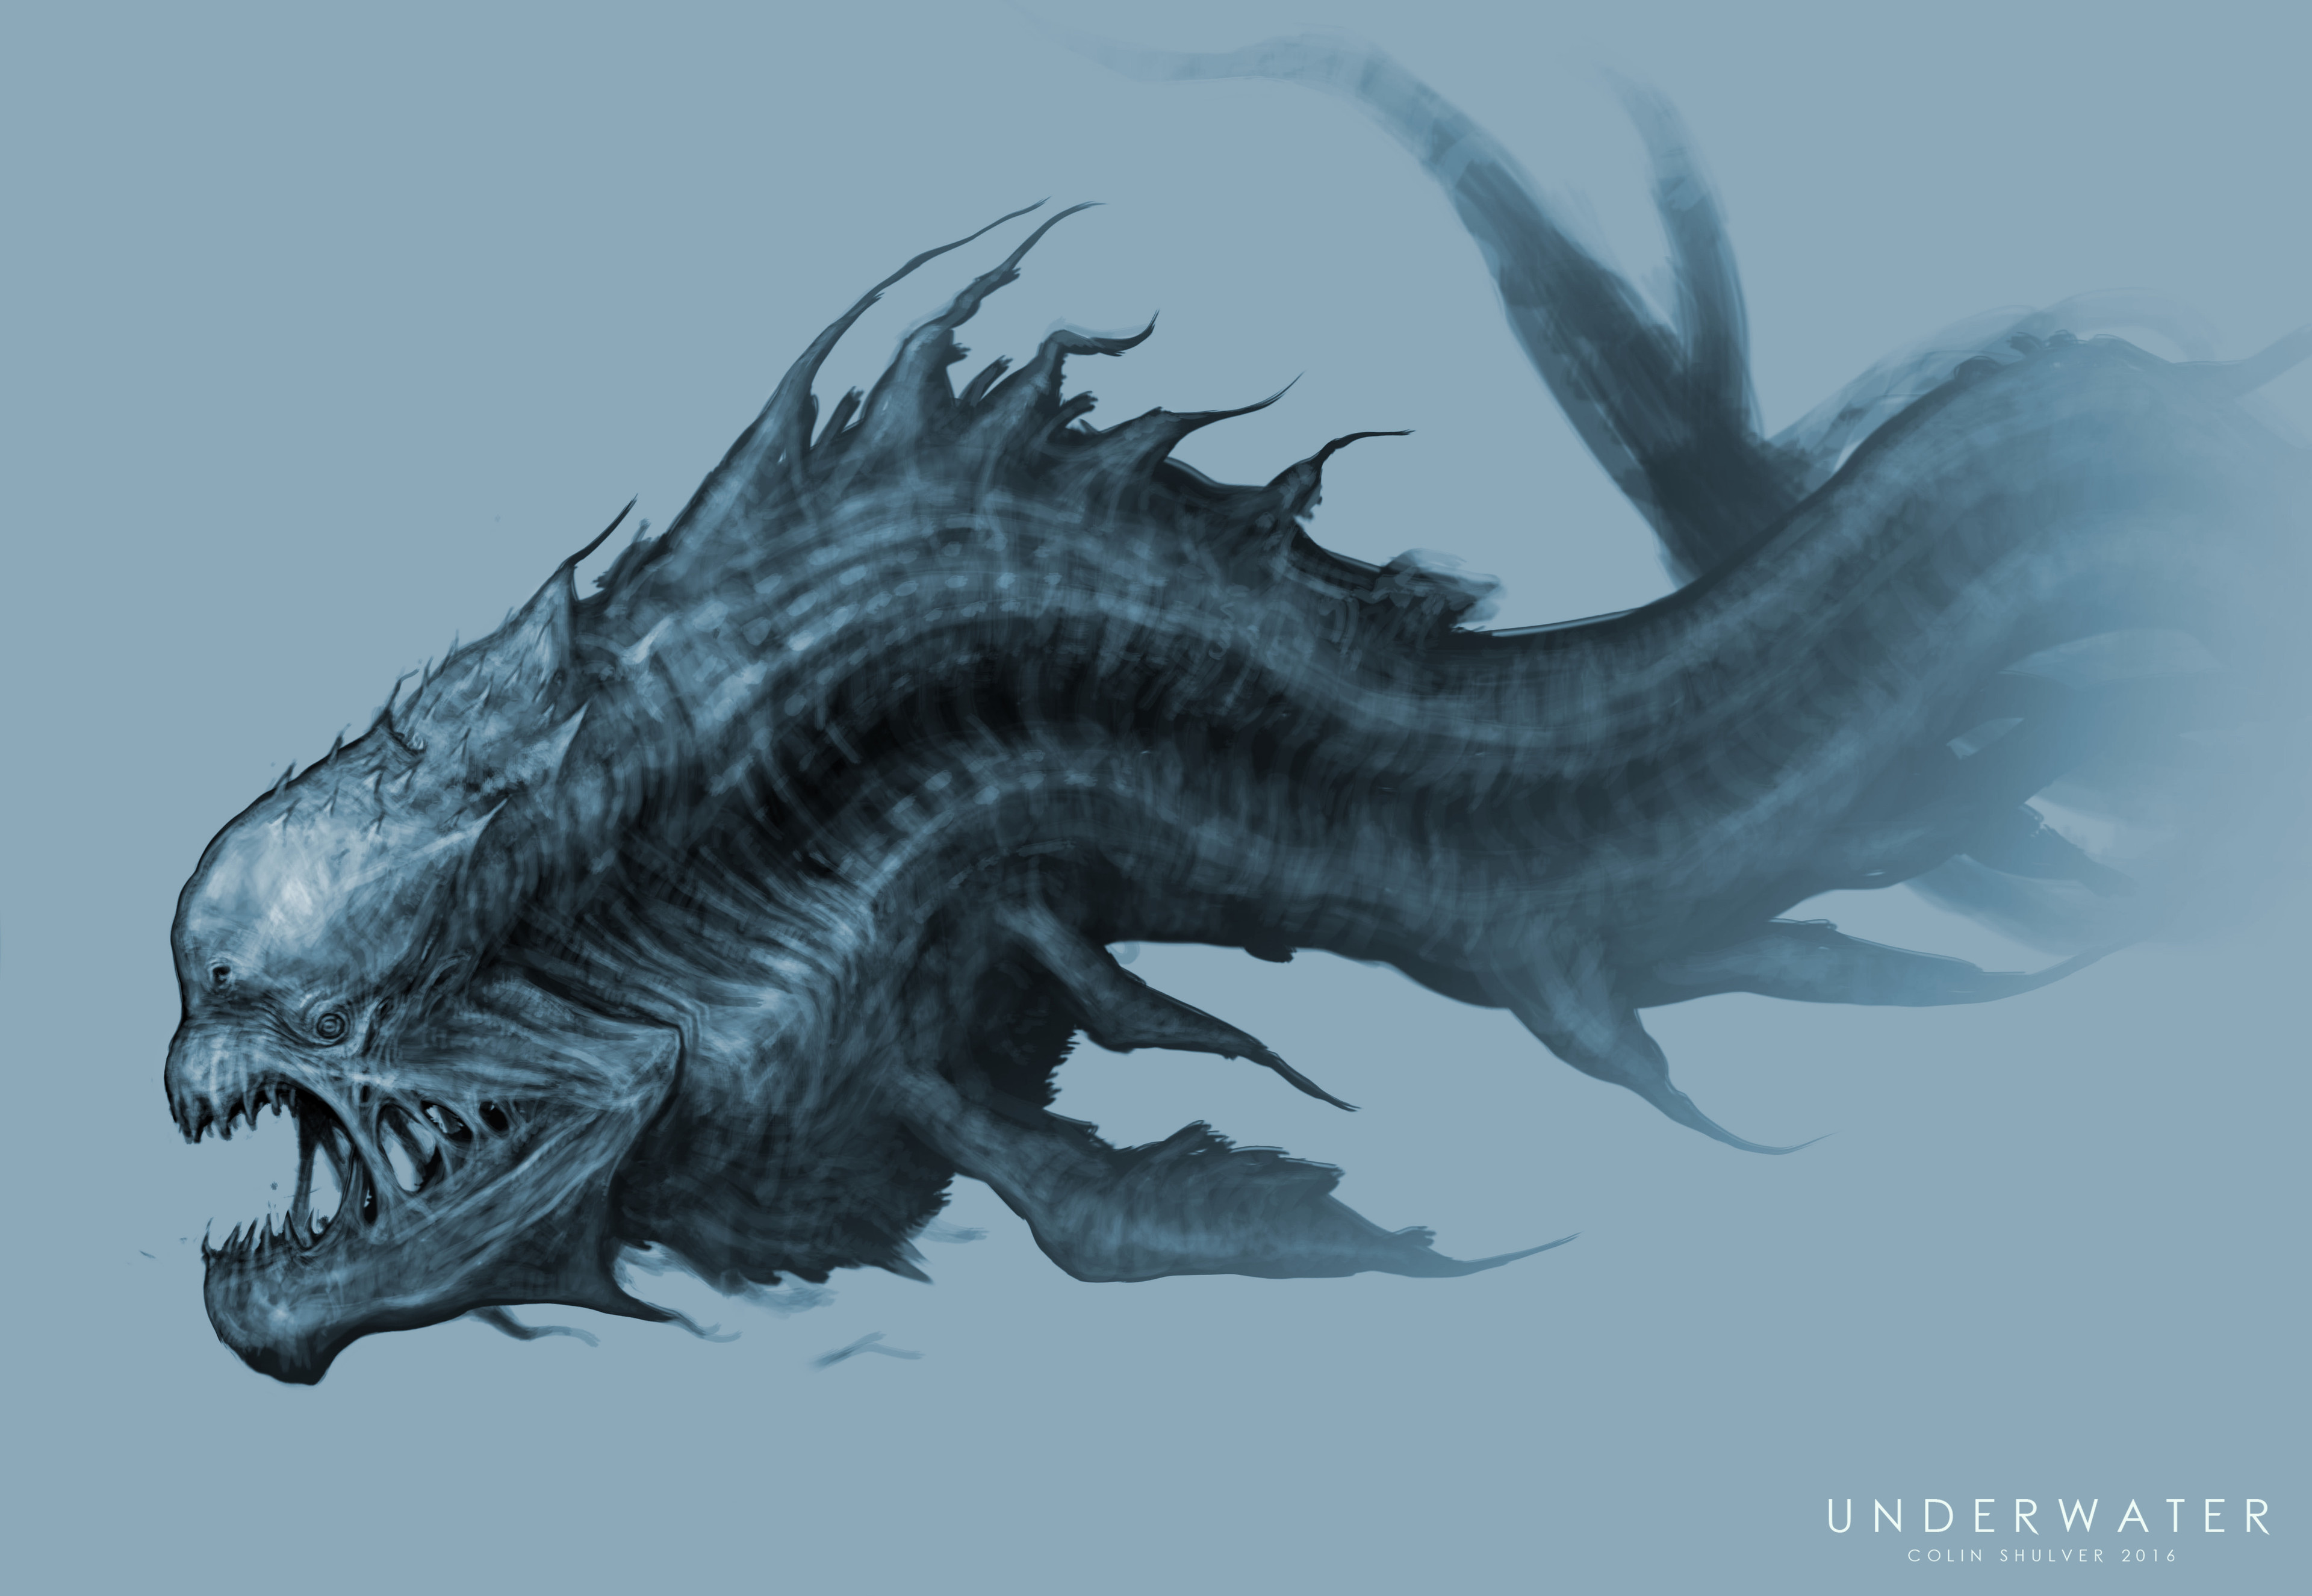 Underwater' Director Shares Creature Concept Art and Talks About